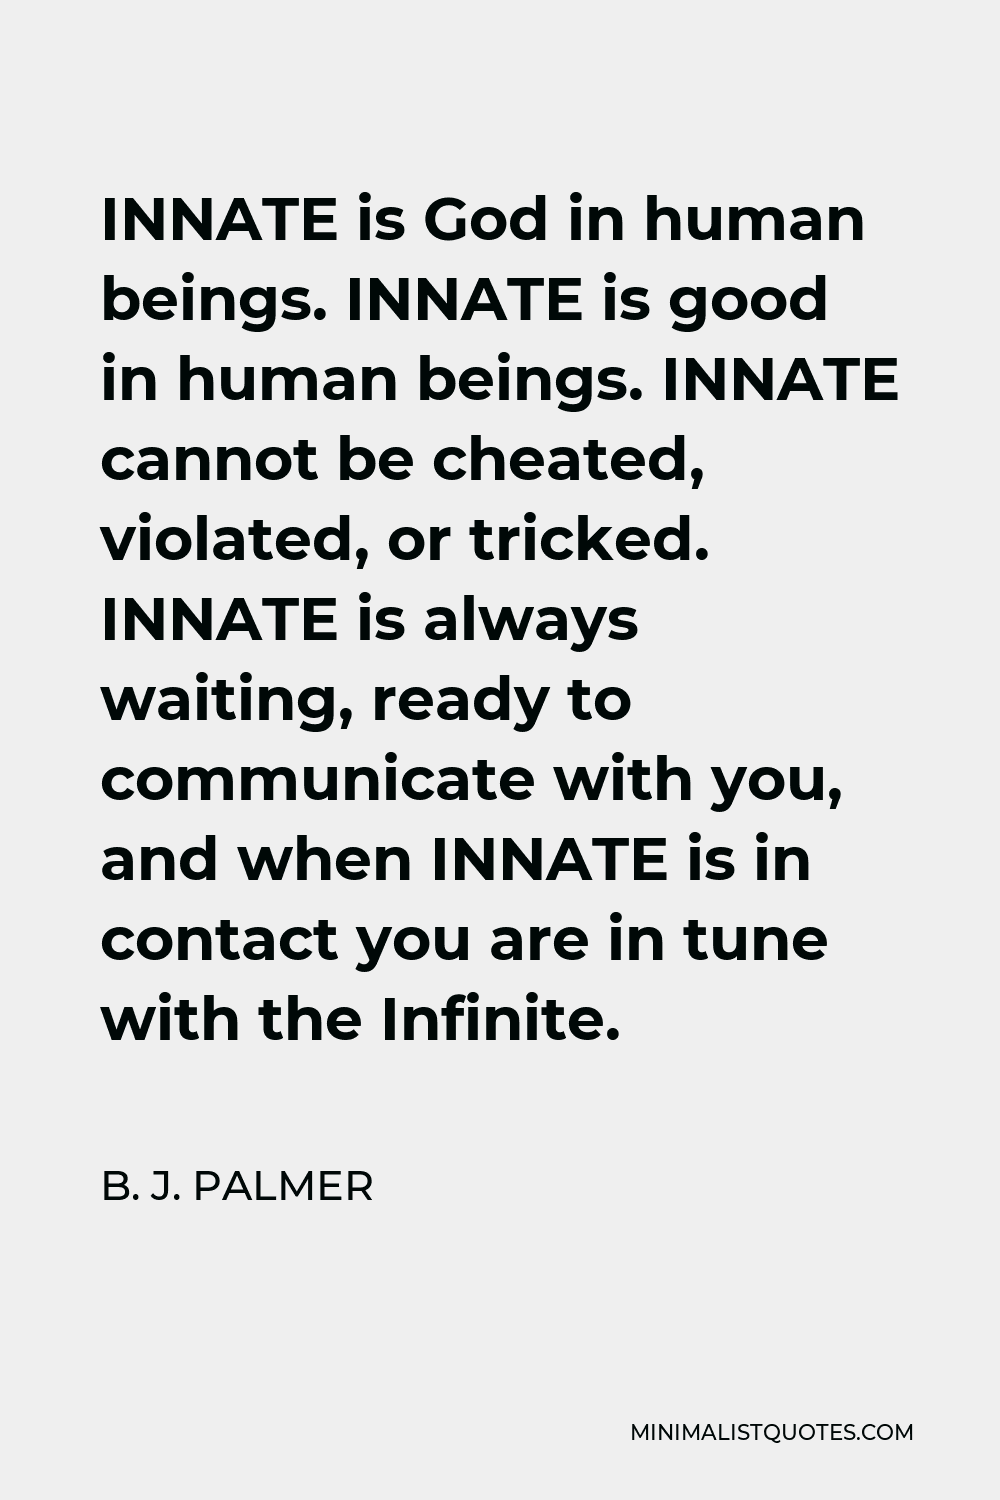 B. J. Palmer Quote - INNATE is God in human beings. INNATE is good in human beings. INNATE cannot be cheated, violated, or tricked. INNATE is always waiting, ready to communicate with you, and when INNATE is in contact you are in tune with the Infinite.